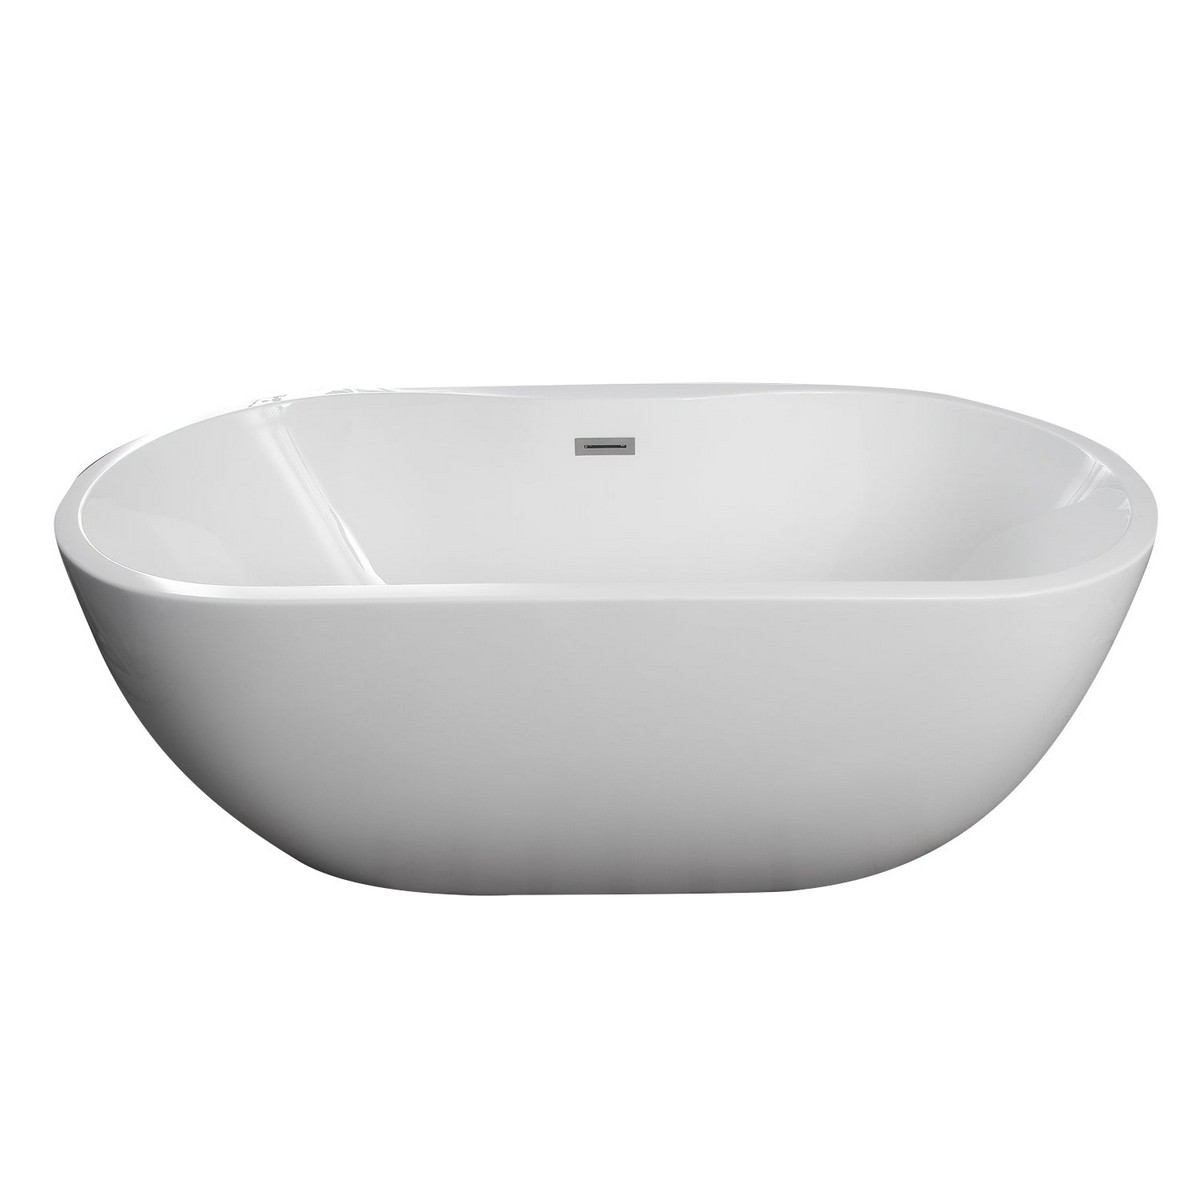 BARCLAY ATOV7H61FIG PENNEY 60 3/4 INCH ACRYLIC FREESTANDING OVAL SOAKING BATHTUB IN WHITE WITH INTEGRAL DRAIN AND OVERFLOW AND 7 INCH RIM HOLES